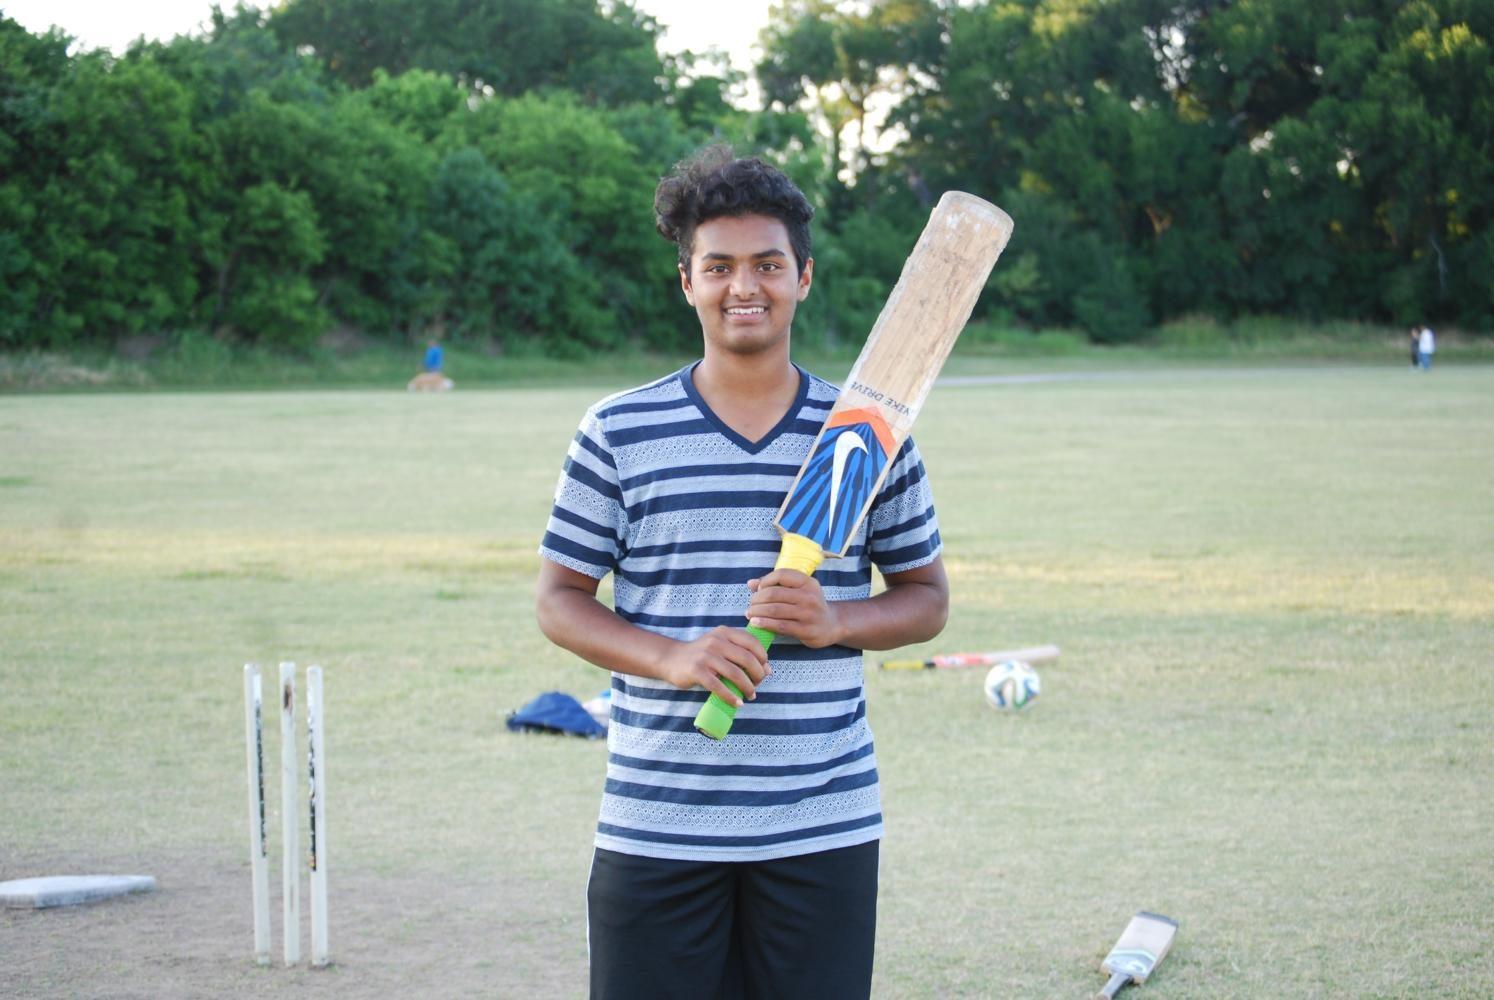 Coppell High School senior Karthik Gattepalli plays for the USA Under19 team. He plays an all-rounder, which means he bats, bowls (pitches) and fields (catches) every game. 
